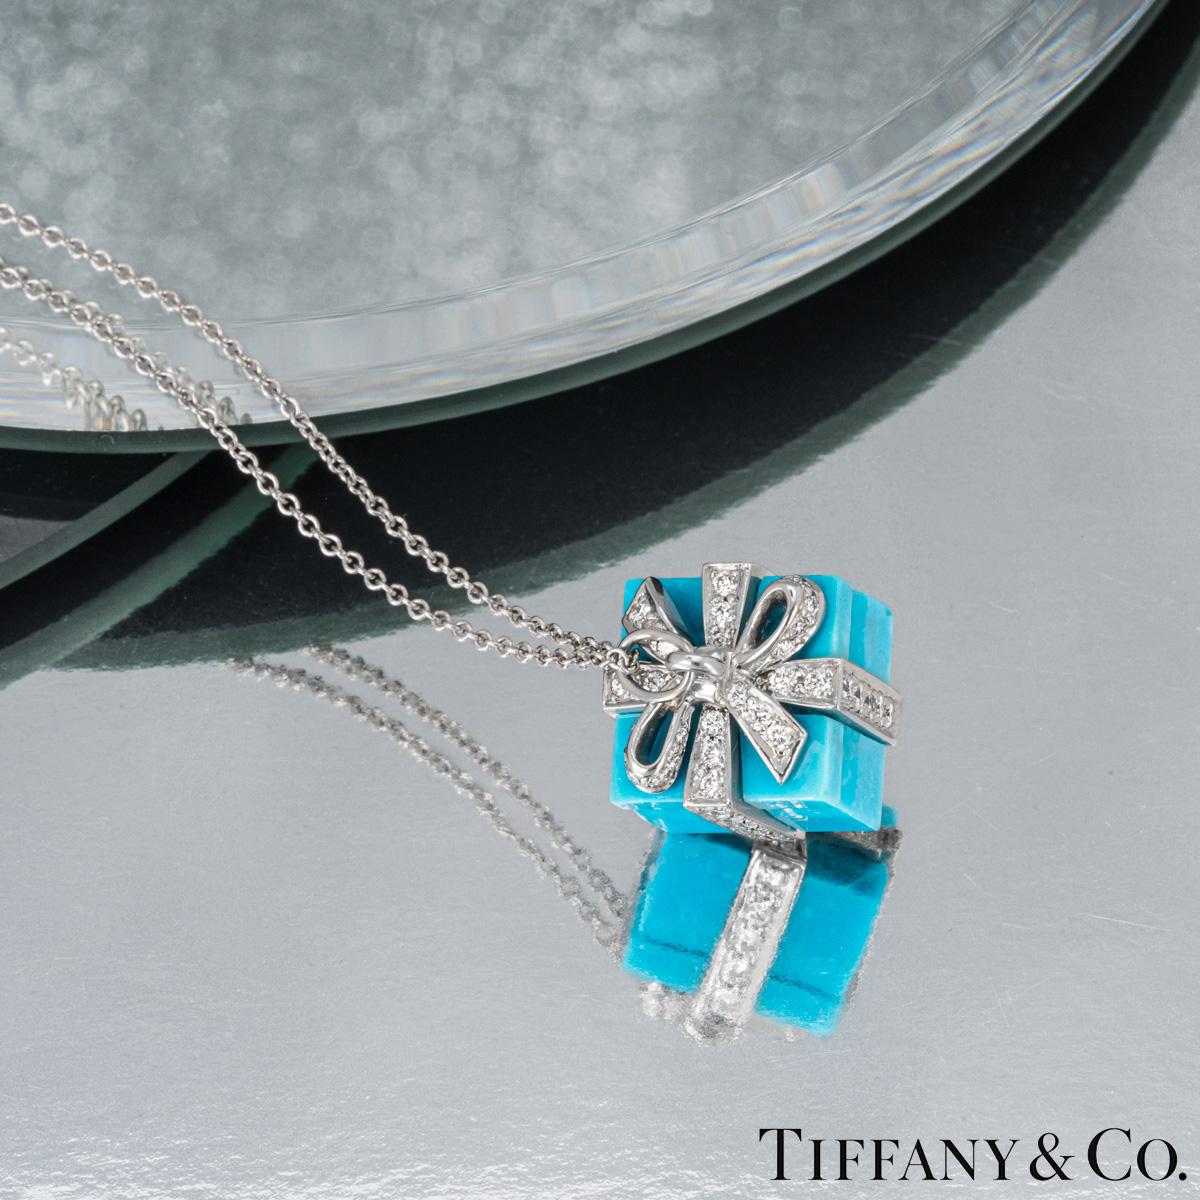 Tiffany & Co. Platinum Turquoise & Diamond Gift Charm Pendant In Excellent Condition For Sale In London, GB